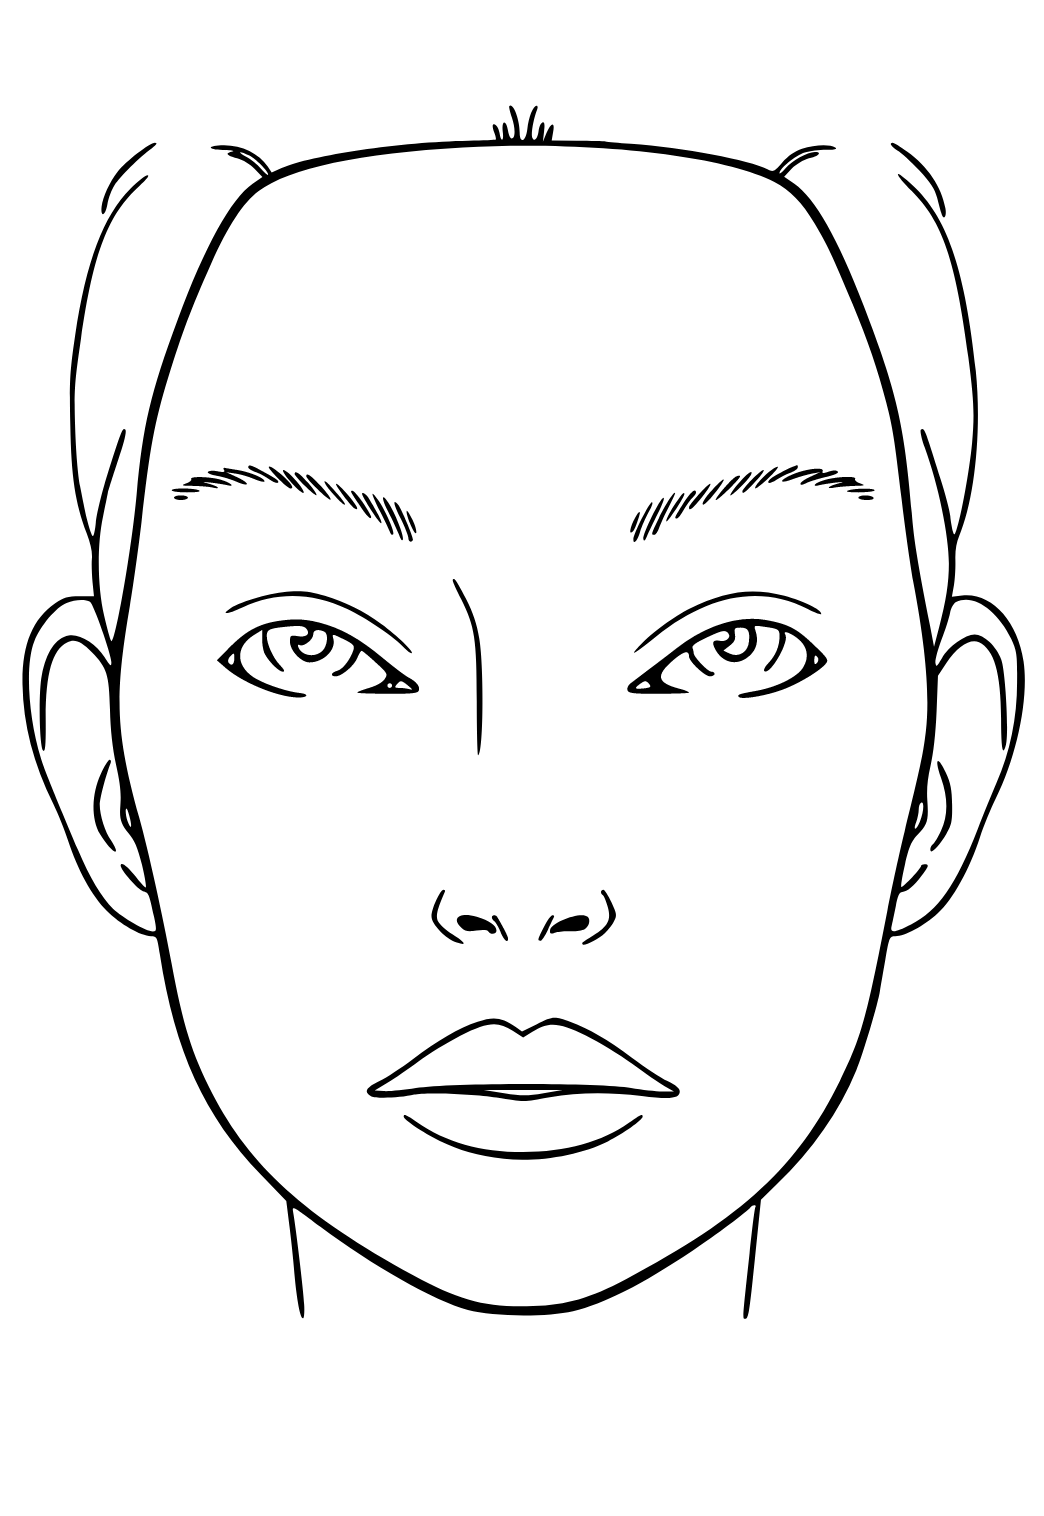 Free printable makeup face coloring page for adults and kids